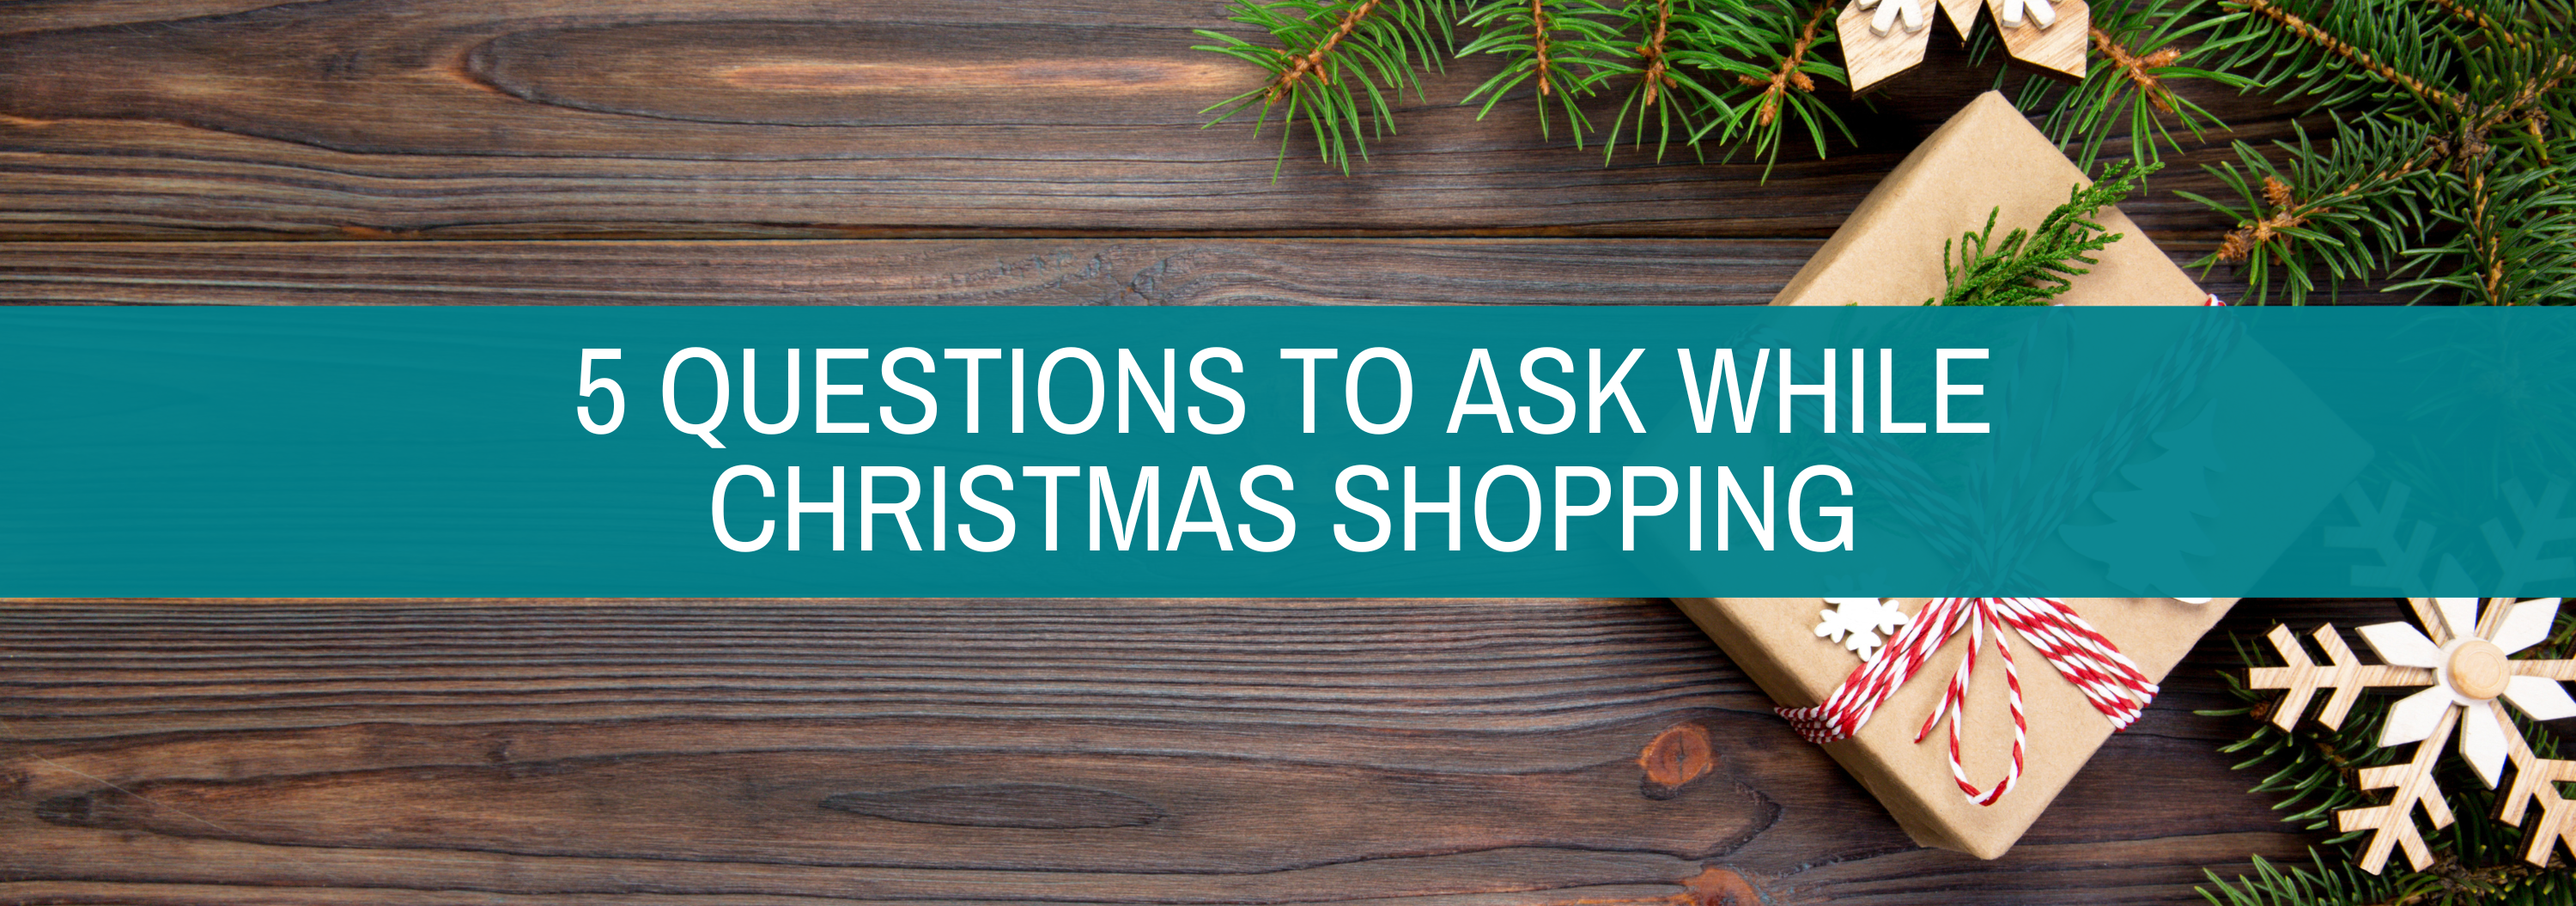 5 Questions to Ask While Christmas Shopping Blog